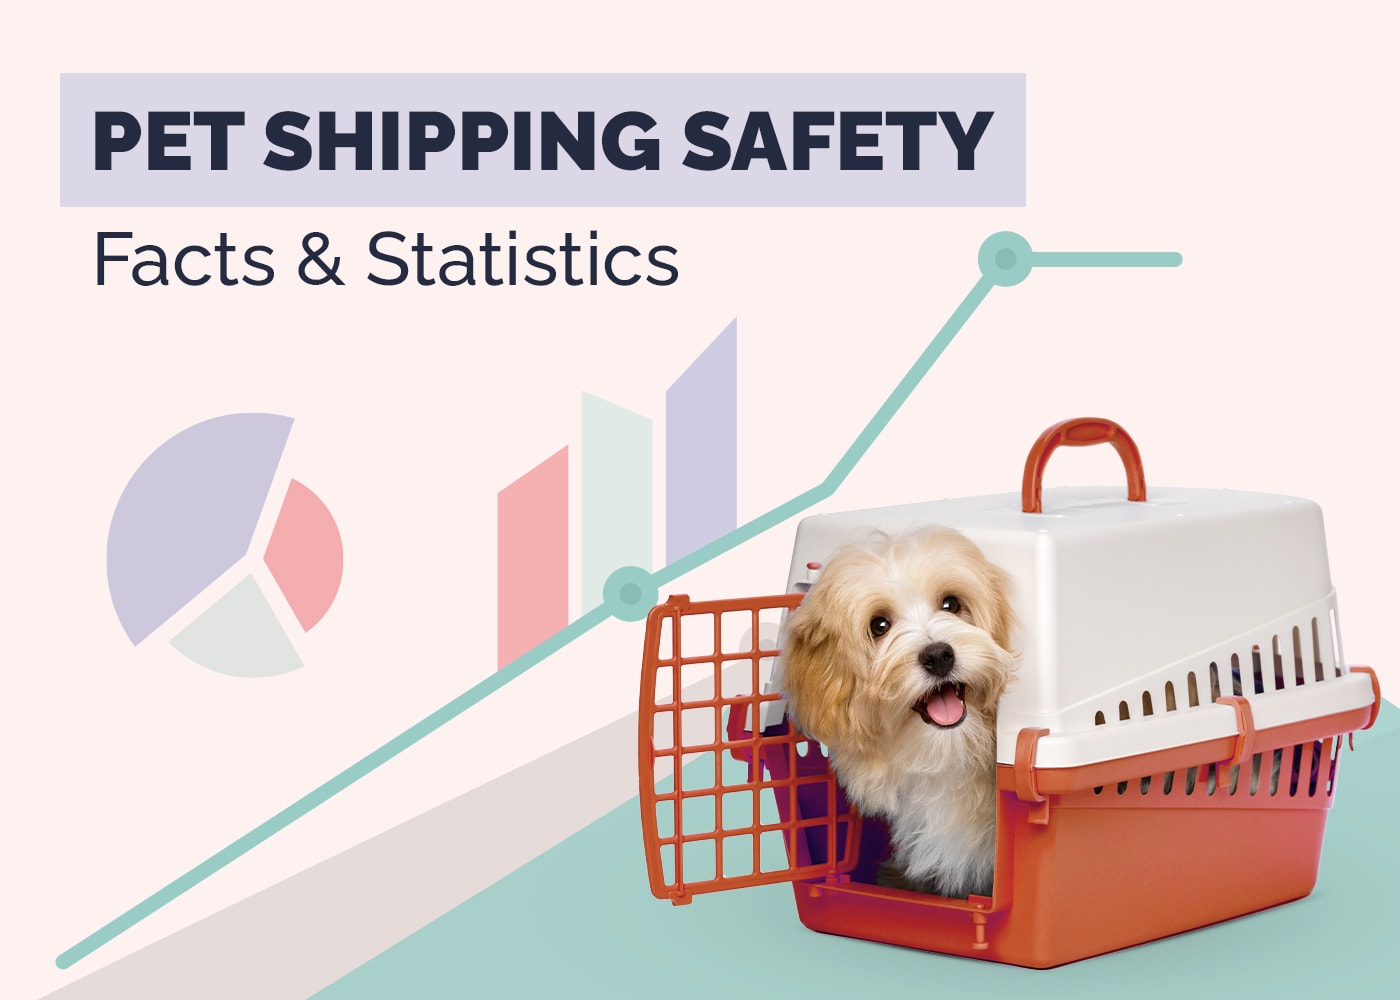 Pet Shipping Safety Facts & Statistics